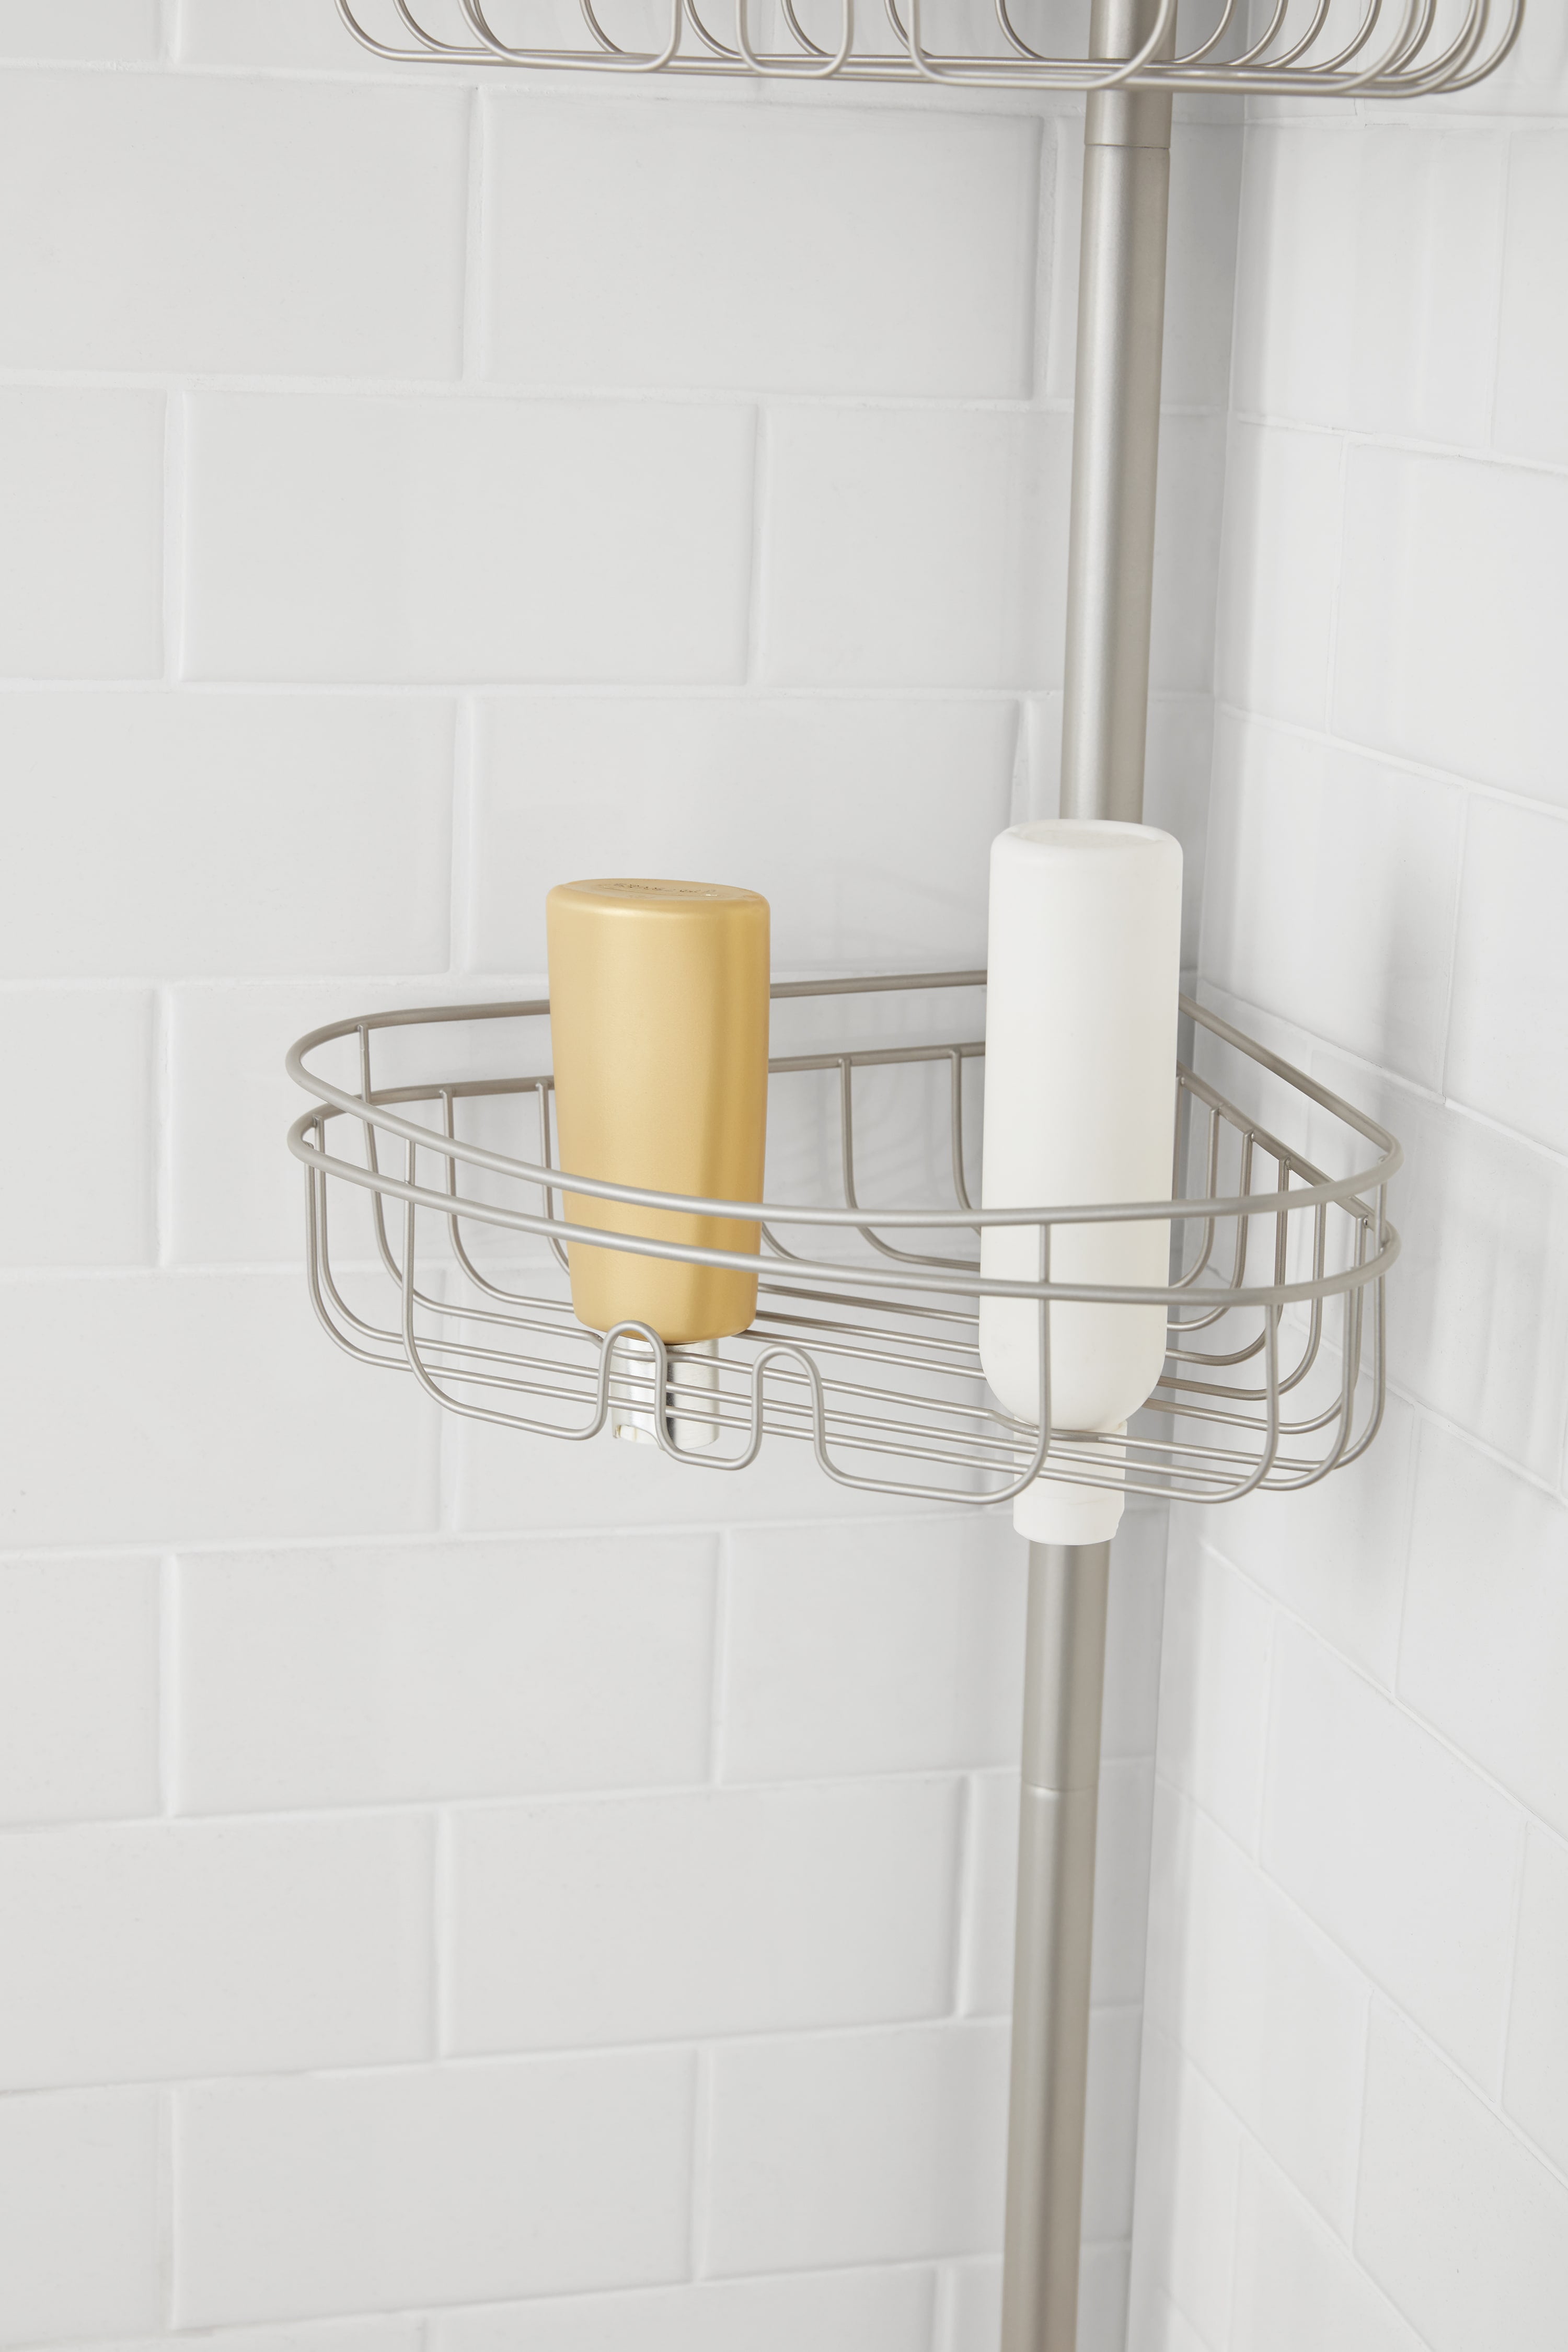 White Tension Pole Shower Caddy with 4 Shelves, 60 to 97, Mainstays 